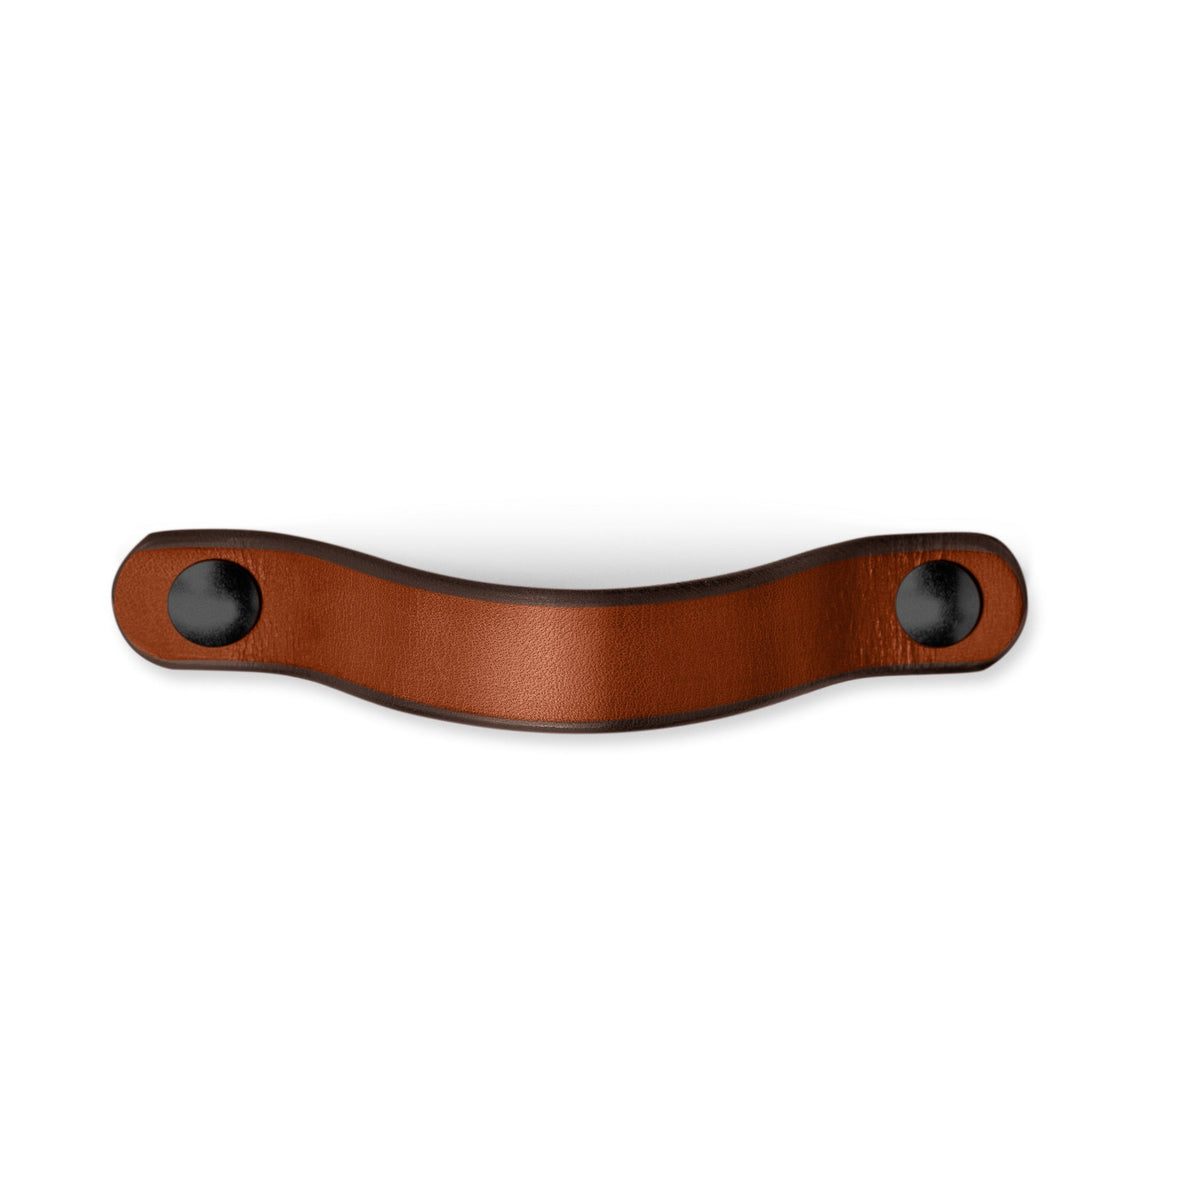 Walnut Studiolo Drawer Pulls AS-IS SALE Leather Handle - The Flanders - 3 Sizes 1 / Nickel Brass or Black (Specify in Notes)